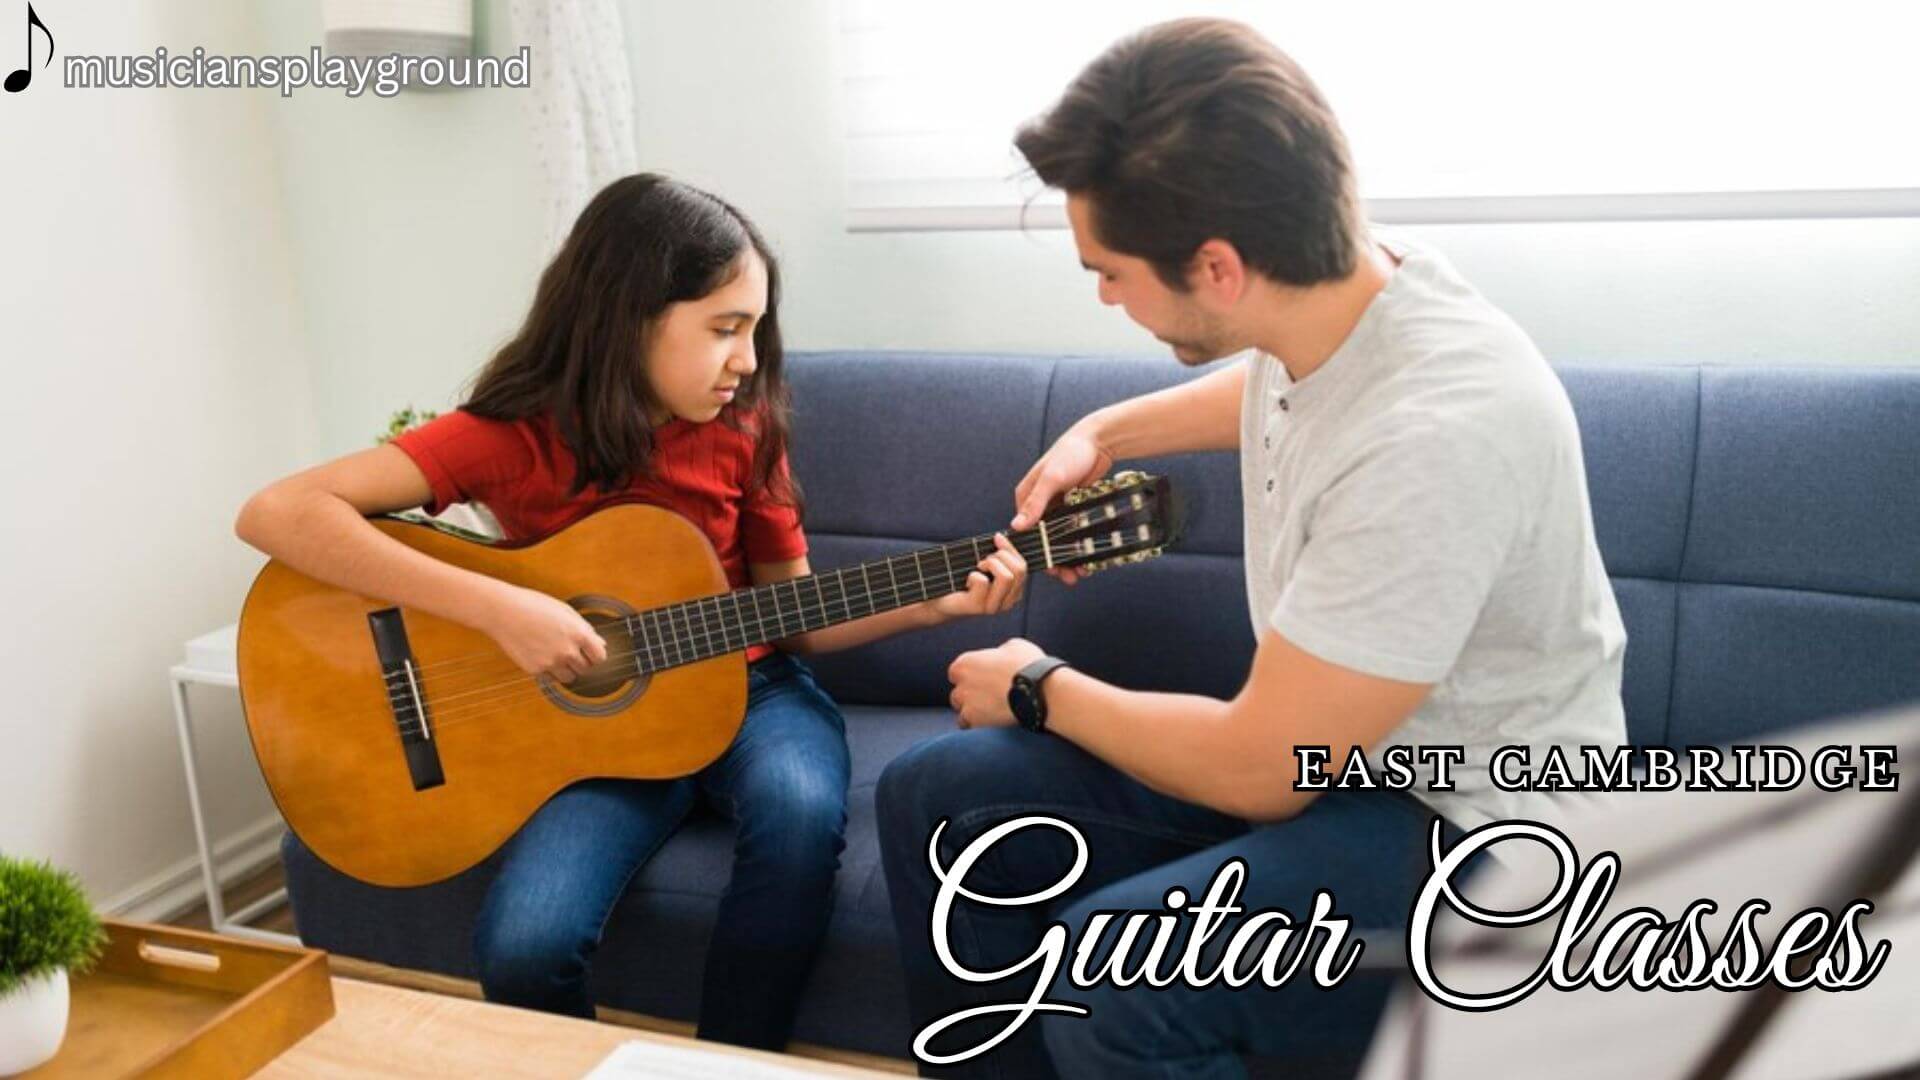 Welcome to Guitar Classes in East Cambridge, Massachusetts